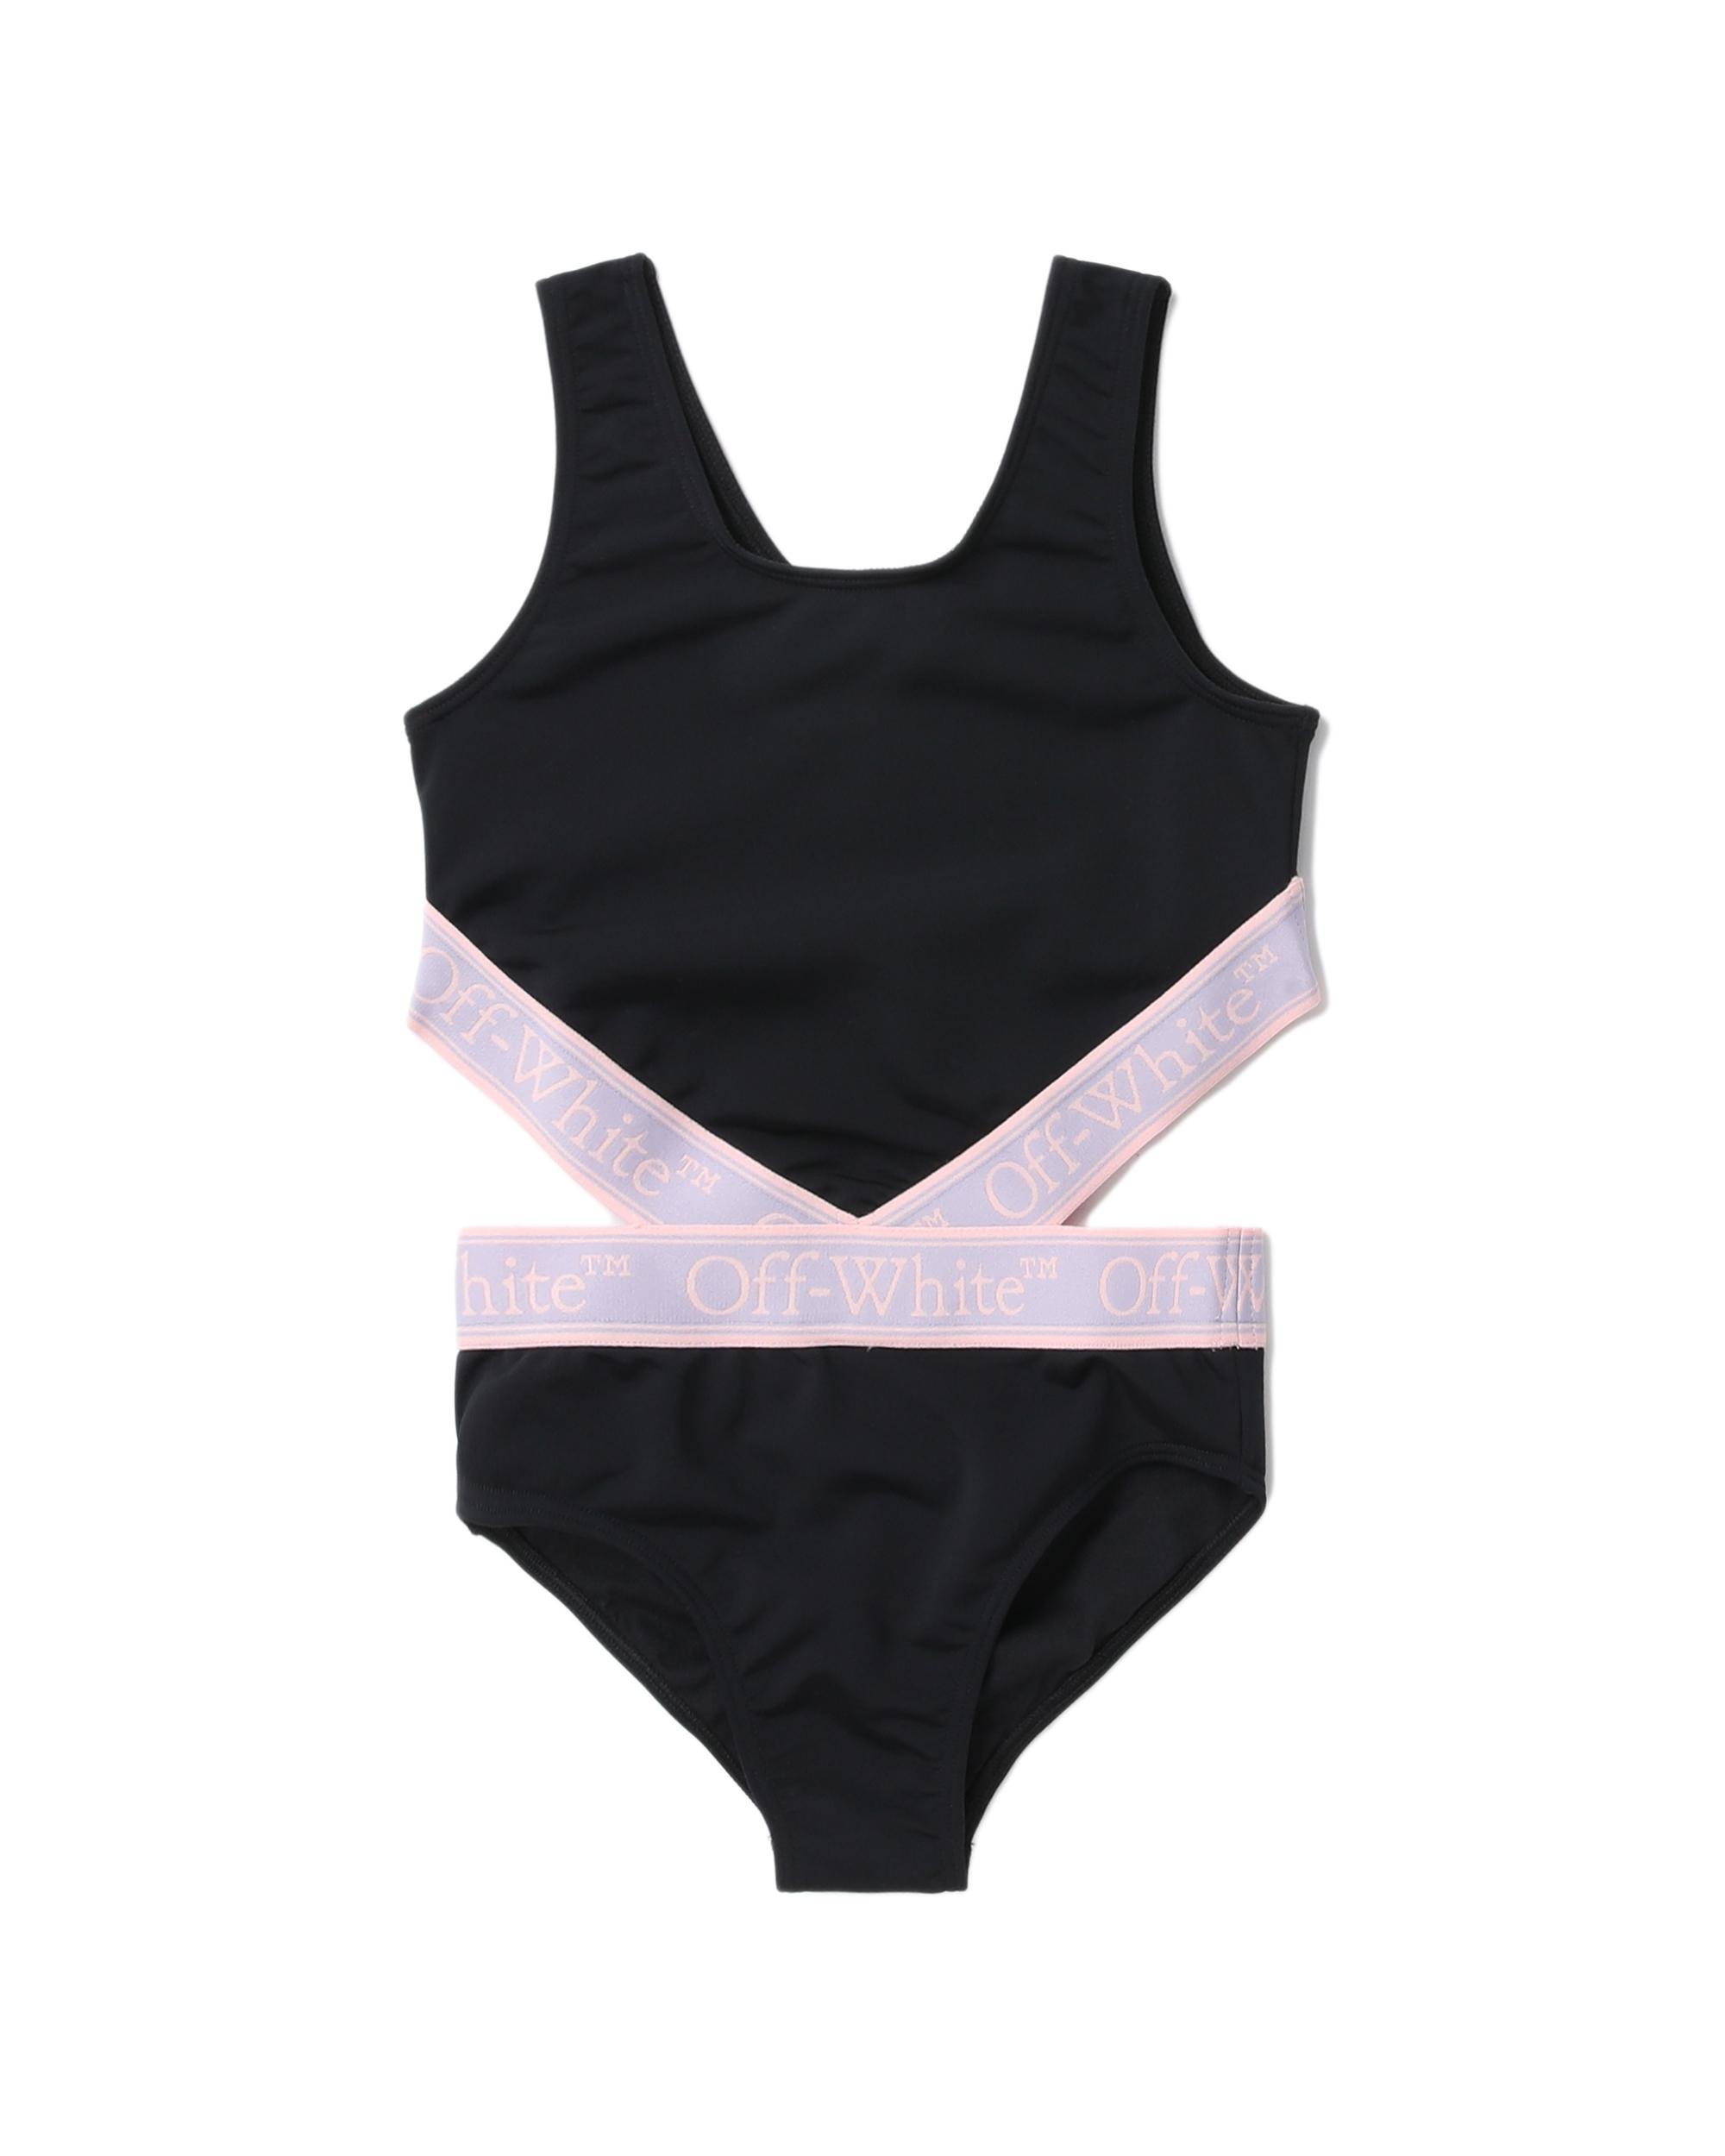 Kids bookish swimsuit by OFF-WHITE